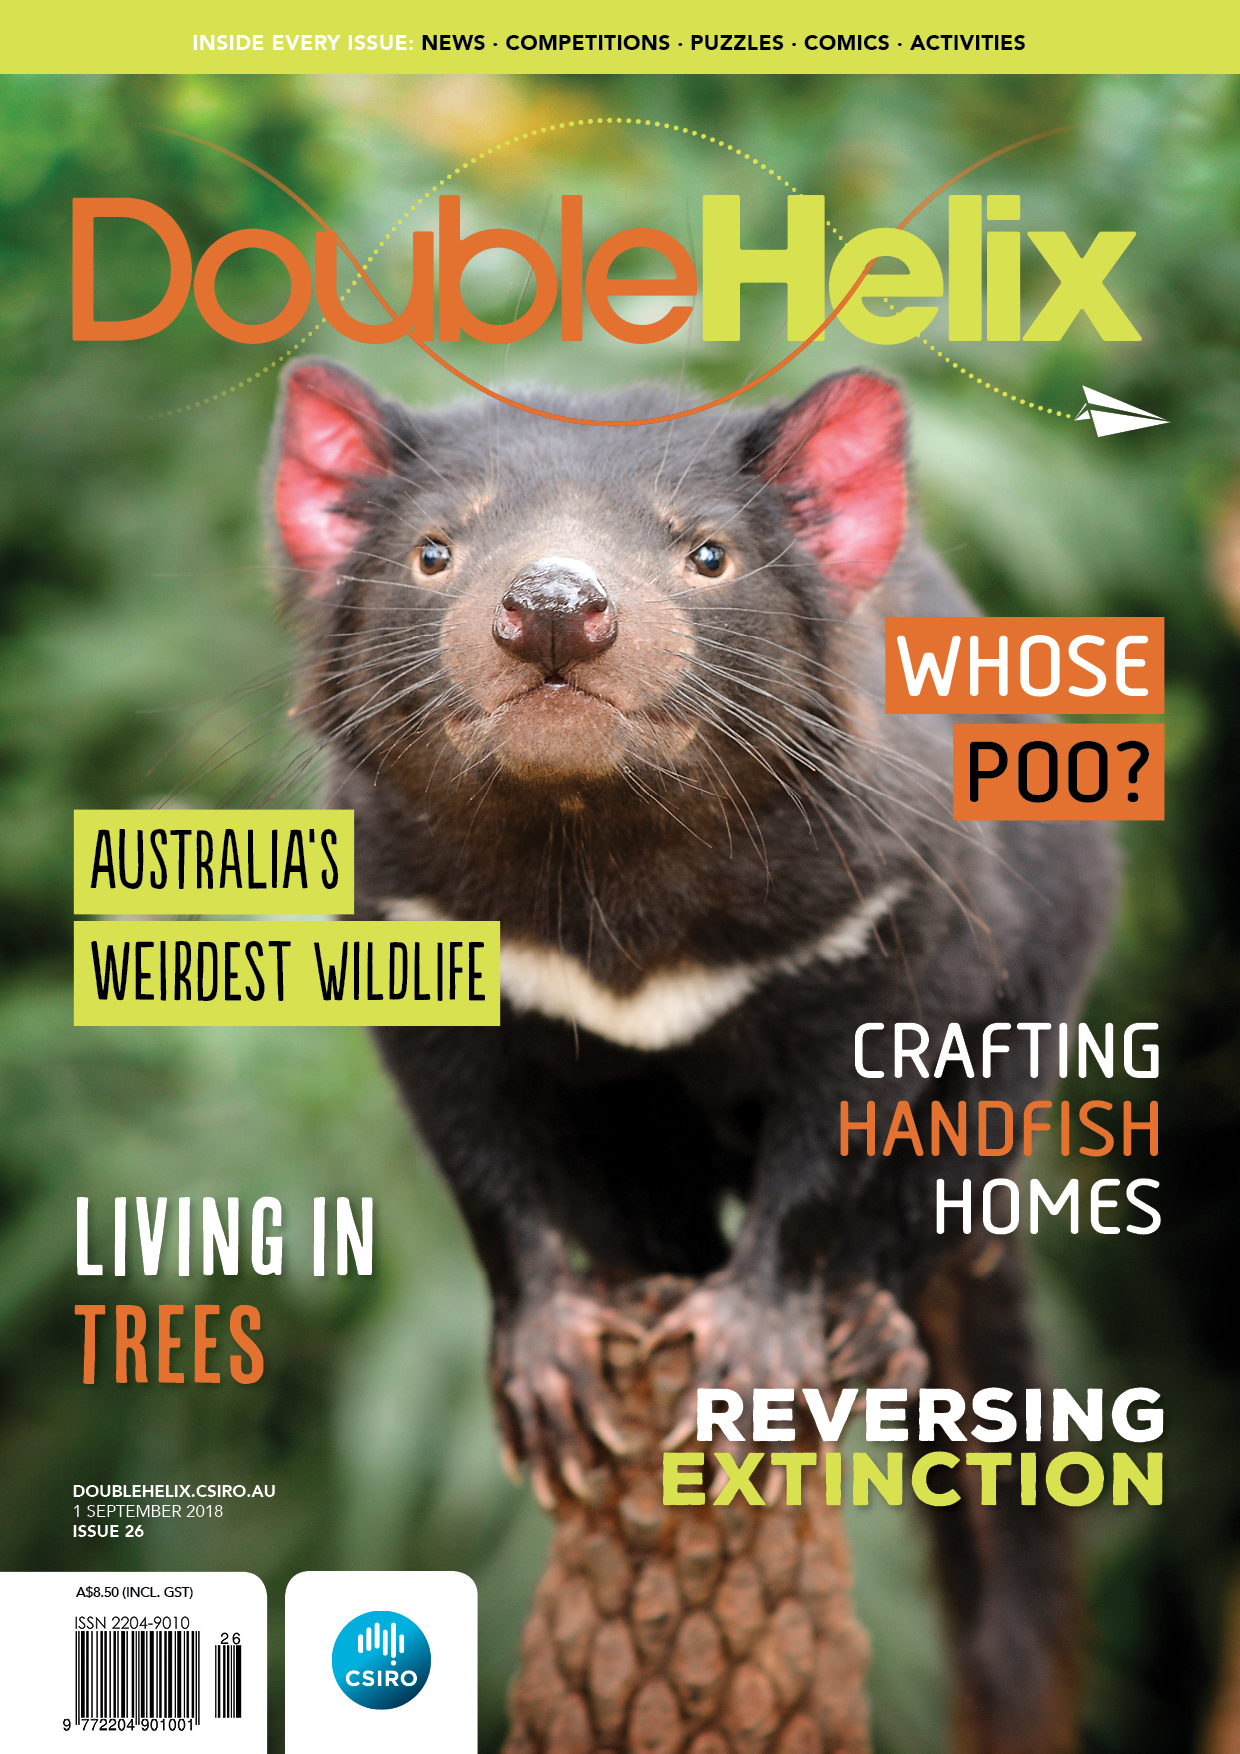 Magazine cover with Tasmanian Devil against green background.